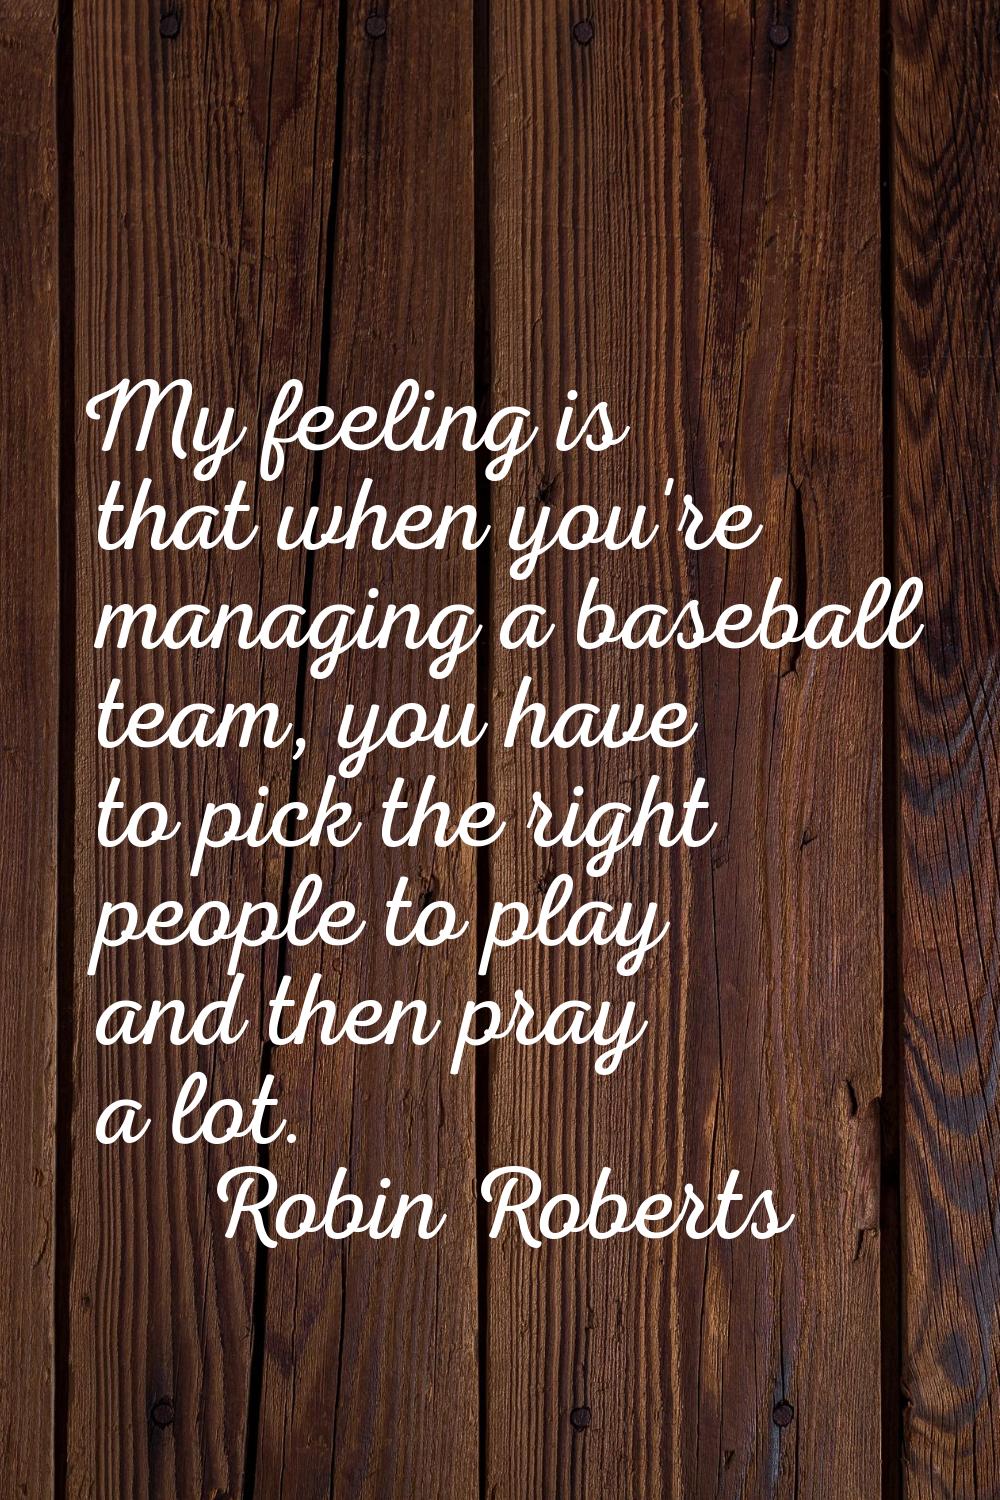 My feeling is that when you're managing a baseball team, you have to pick the right people to play 